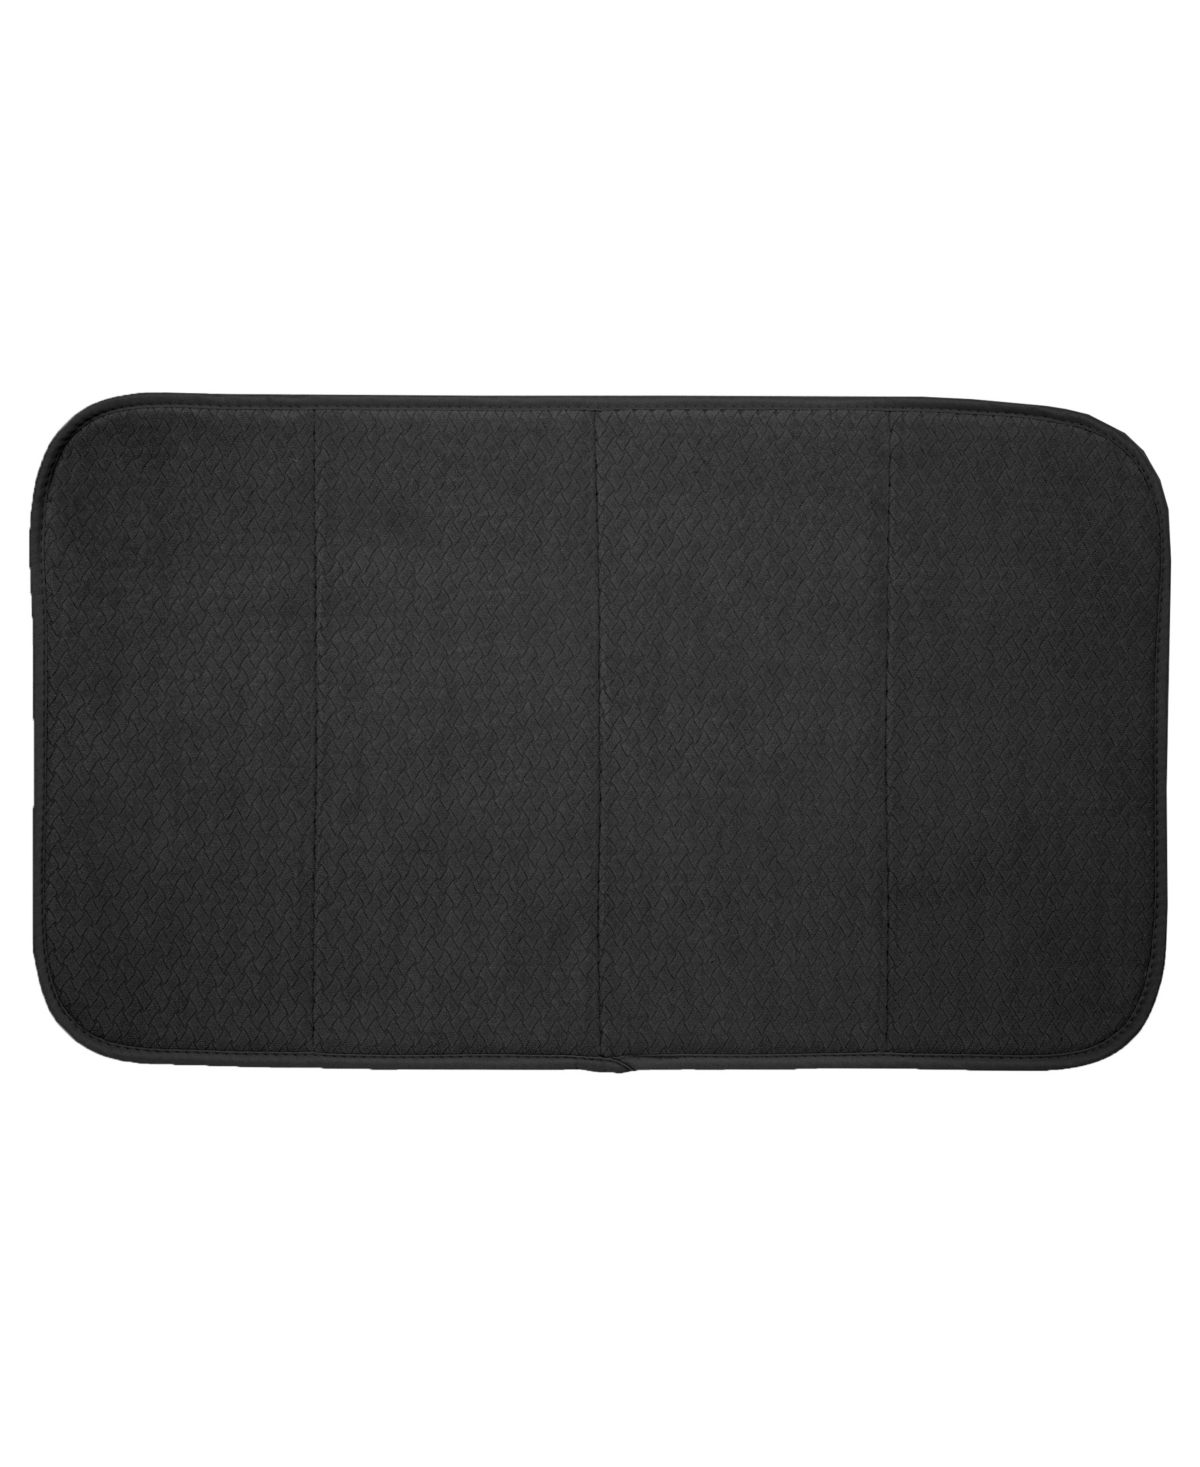 All-clad Dish Drying Mat In Black